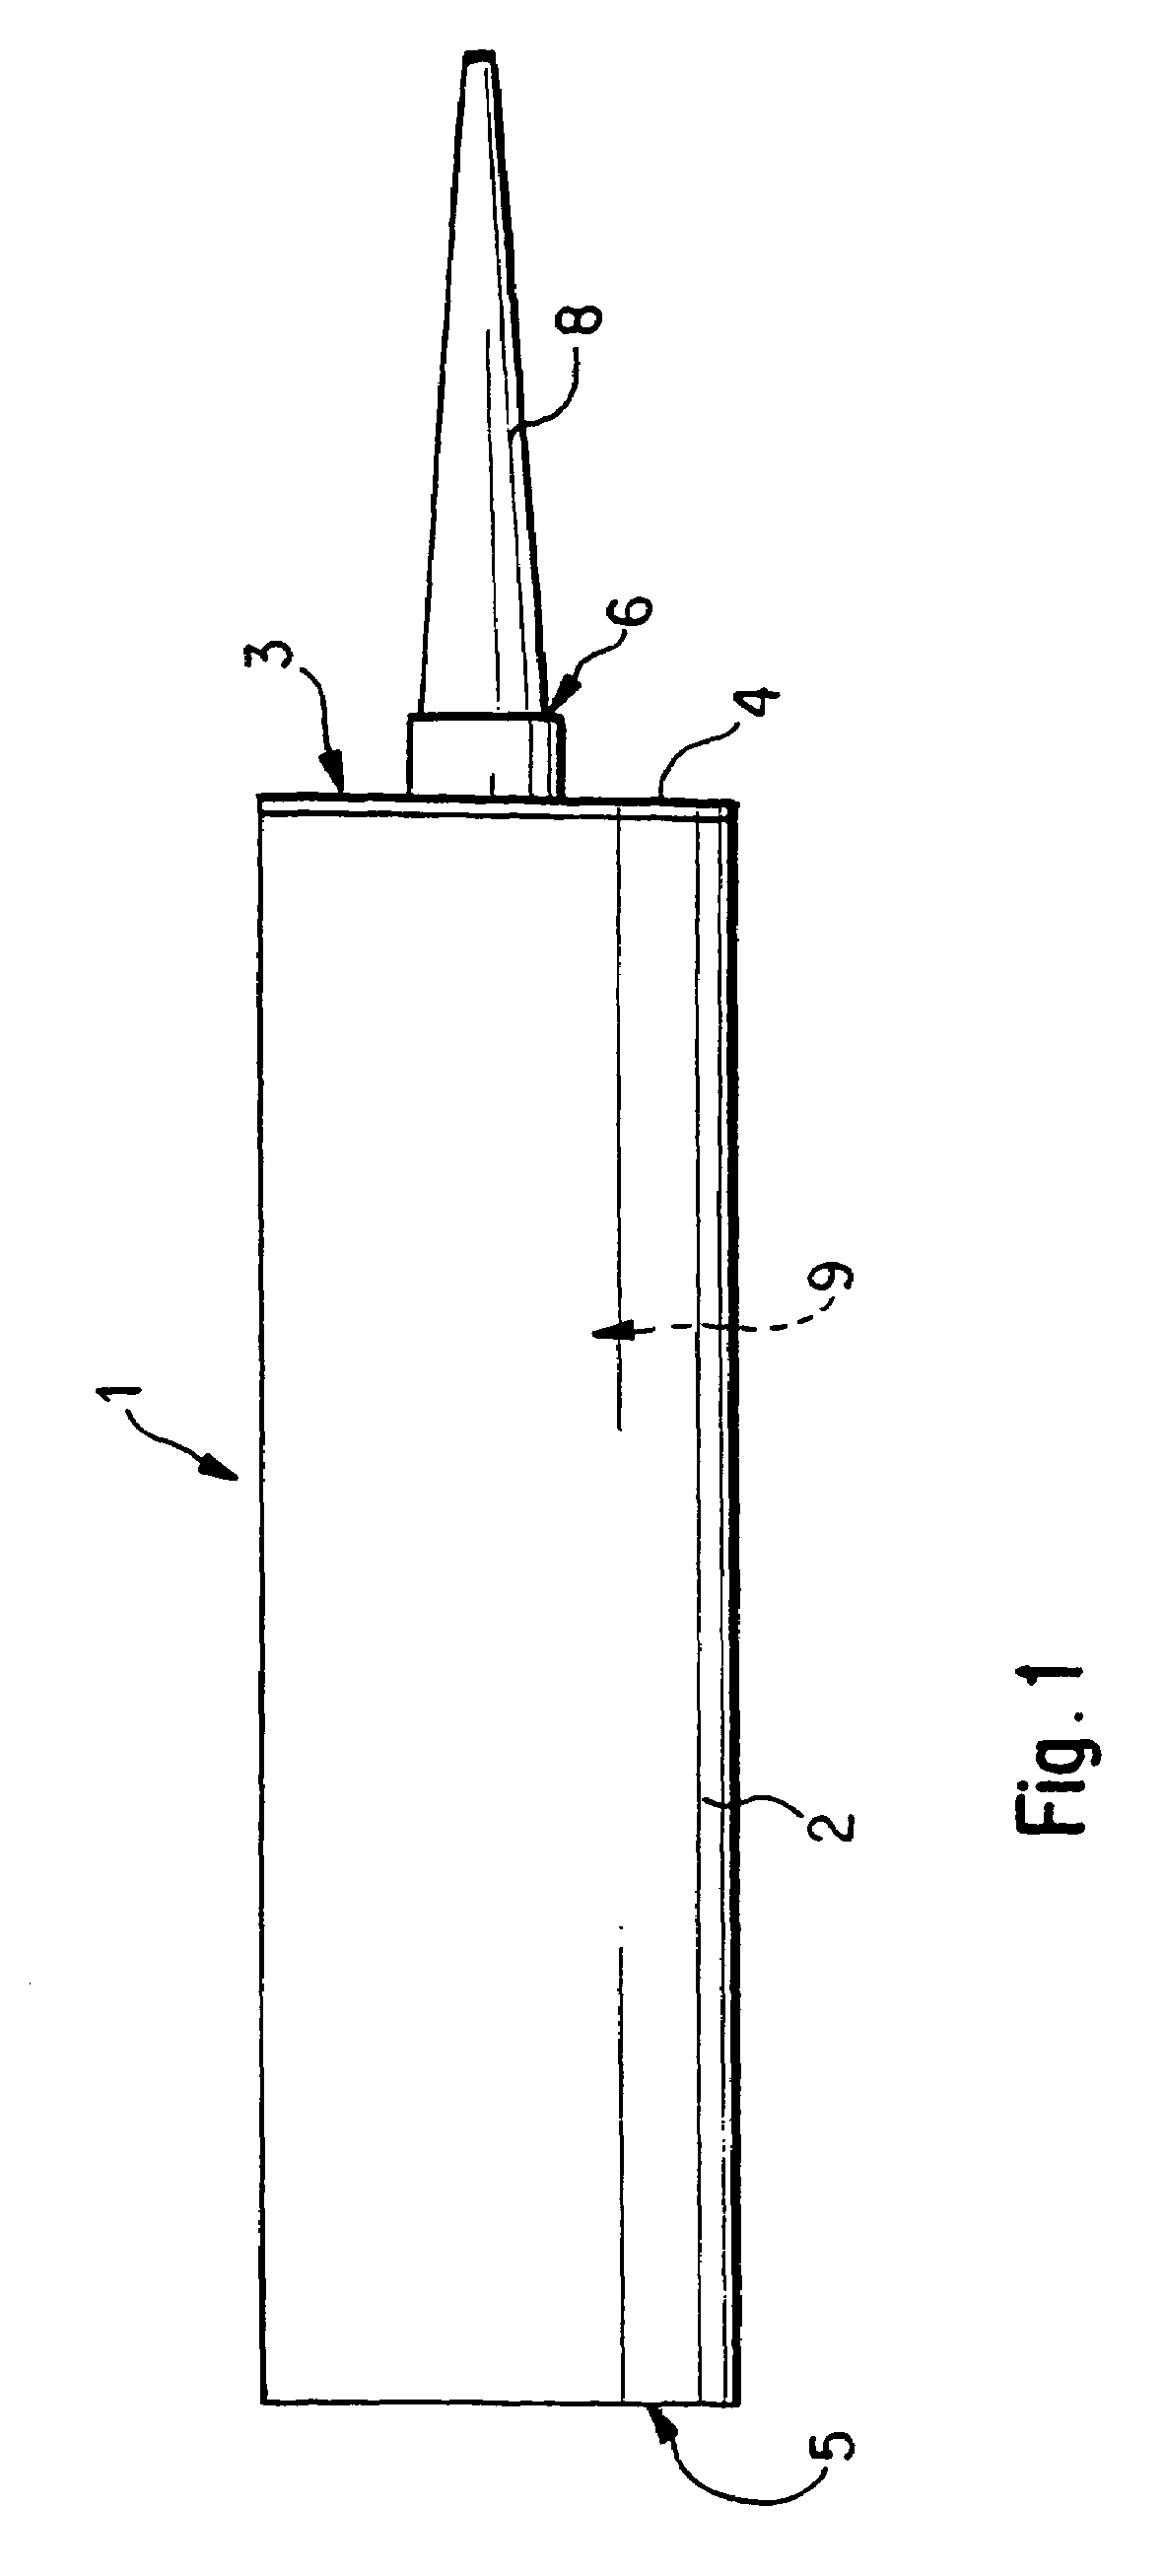 Apparatus and method for mixing and dispensing components of a composition